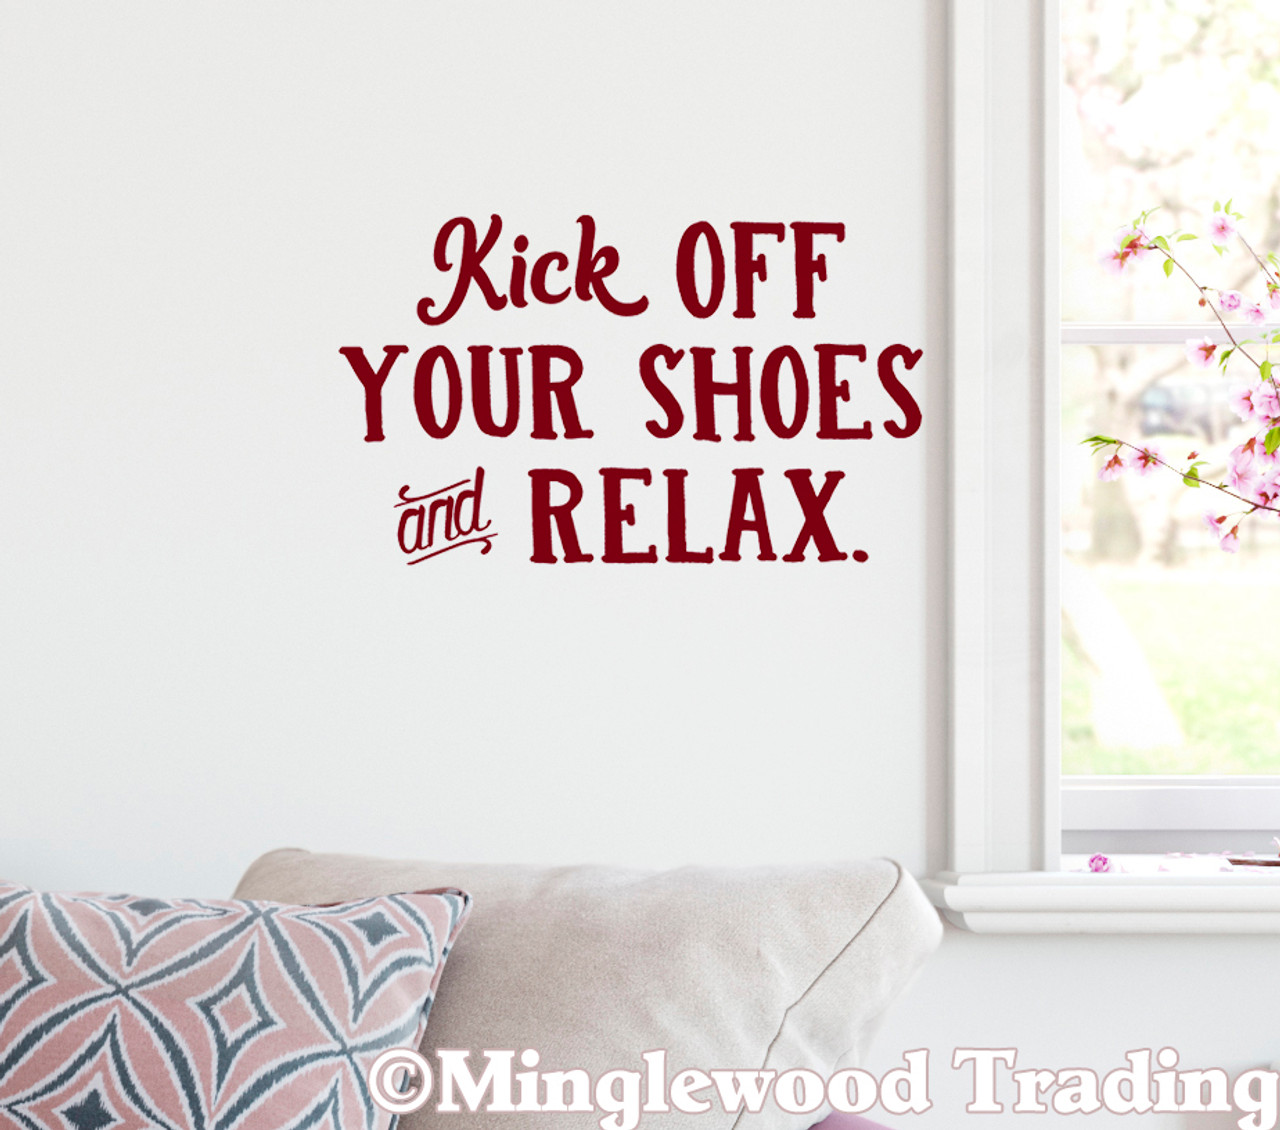 Kick Off Your Shoes And Relax 10" x 6" Vinyl Decal Sticker